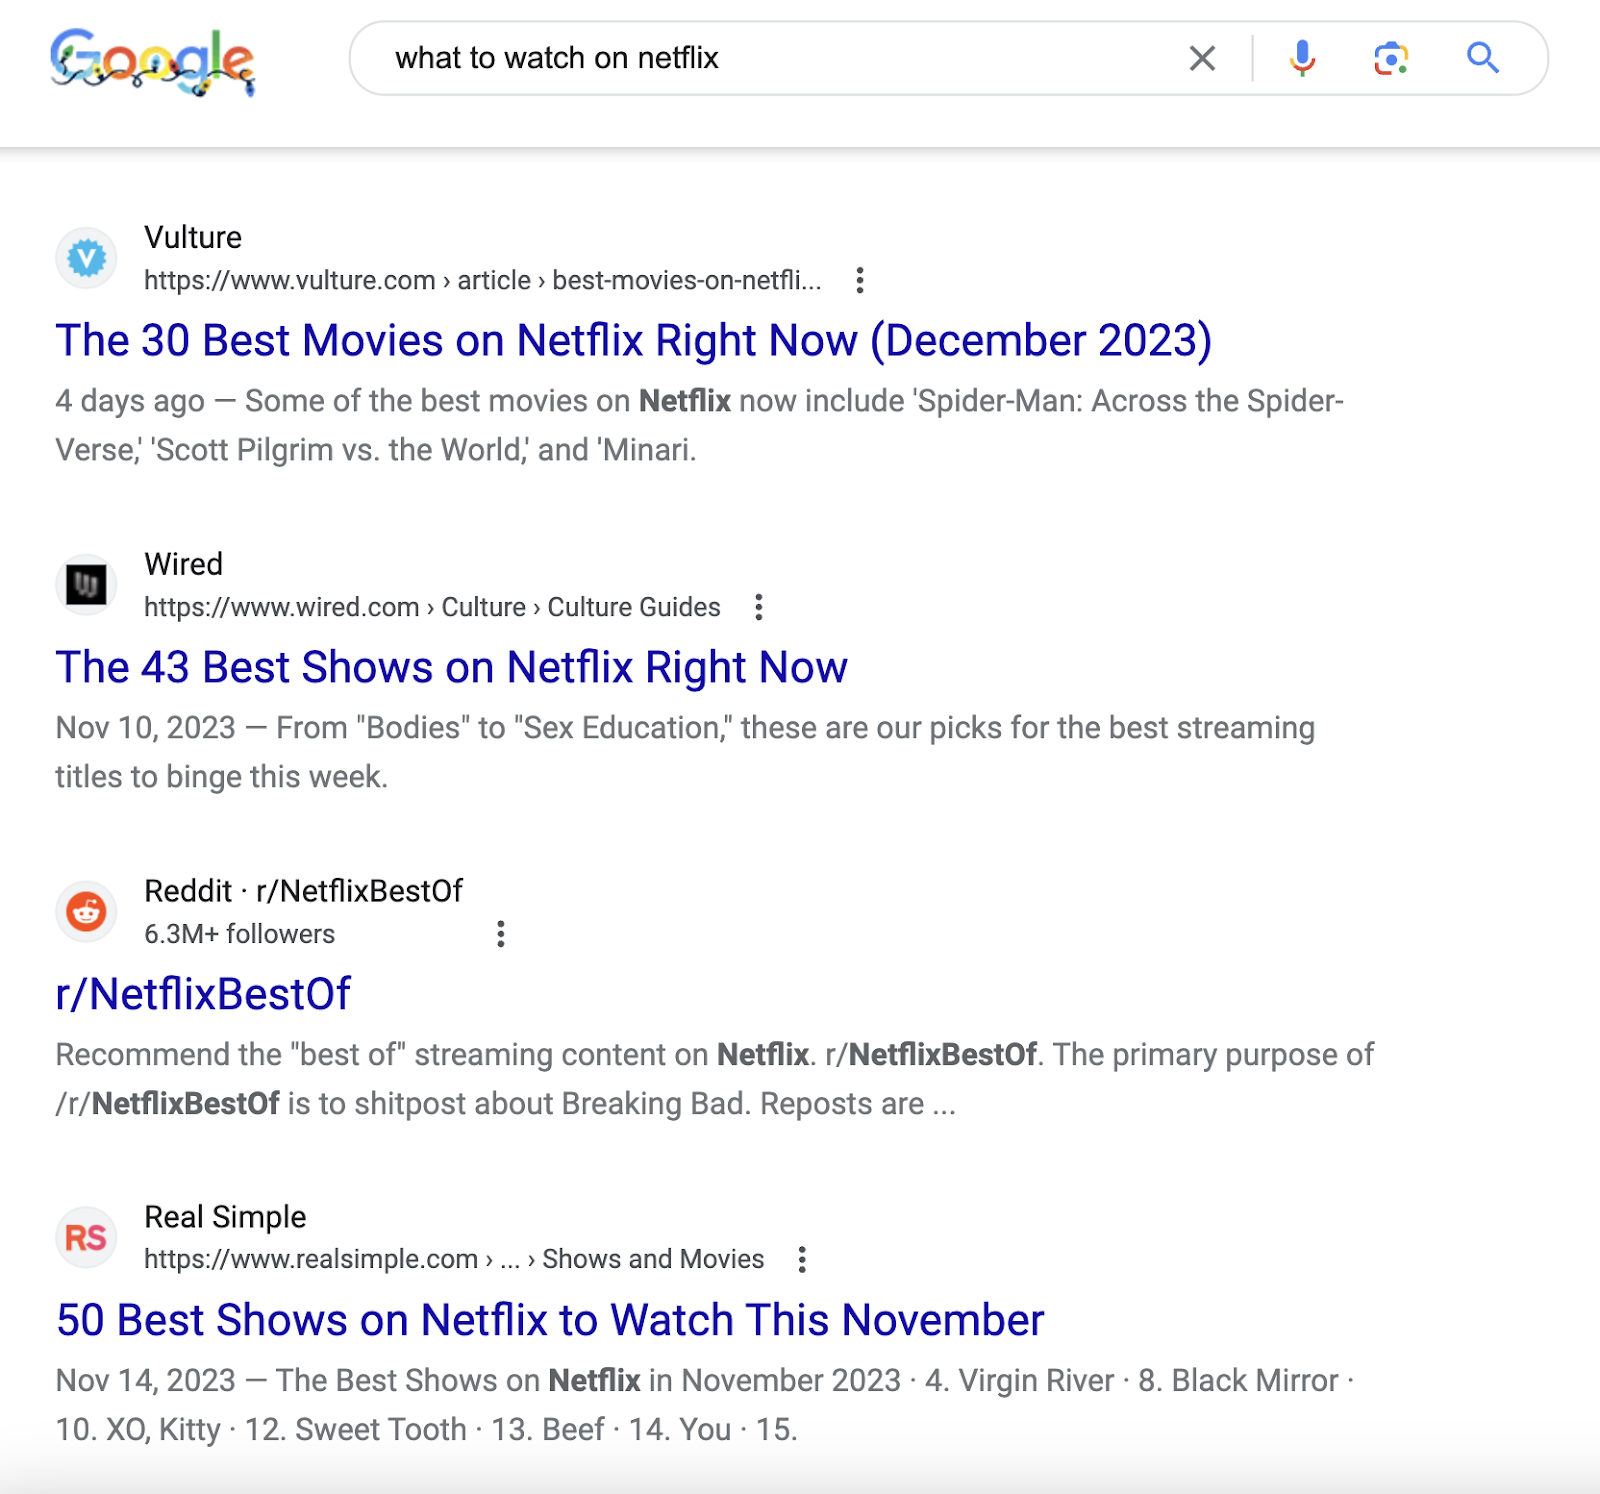 Google's search results for “what to watch on netflix"